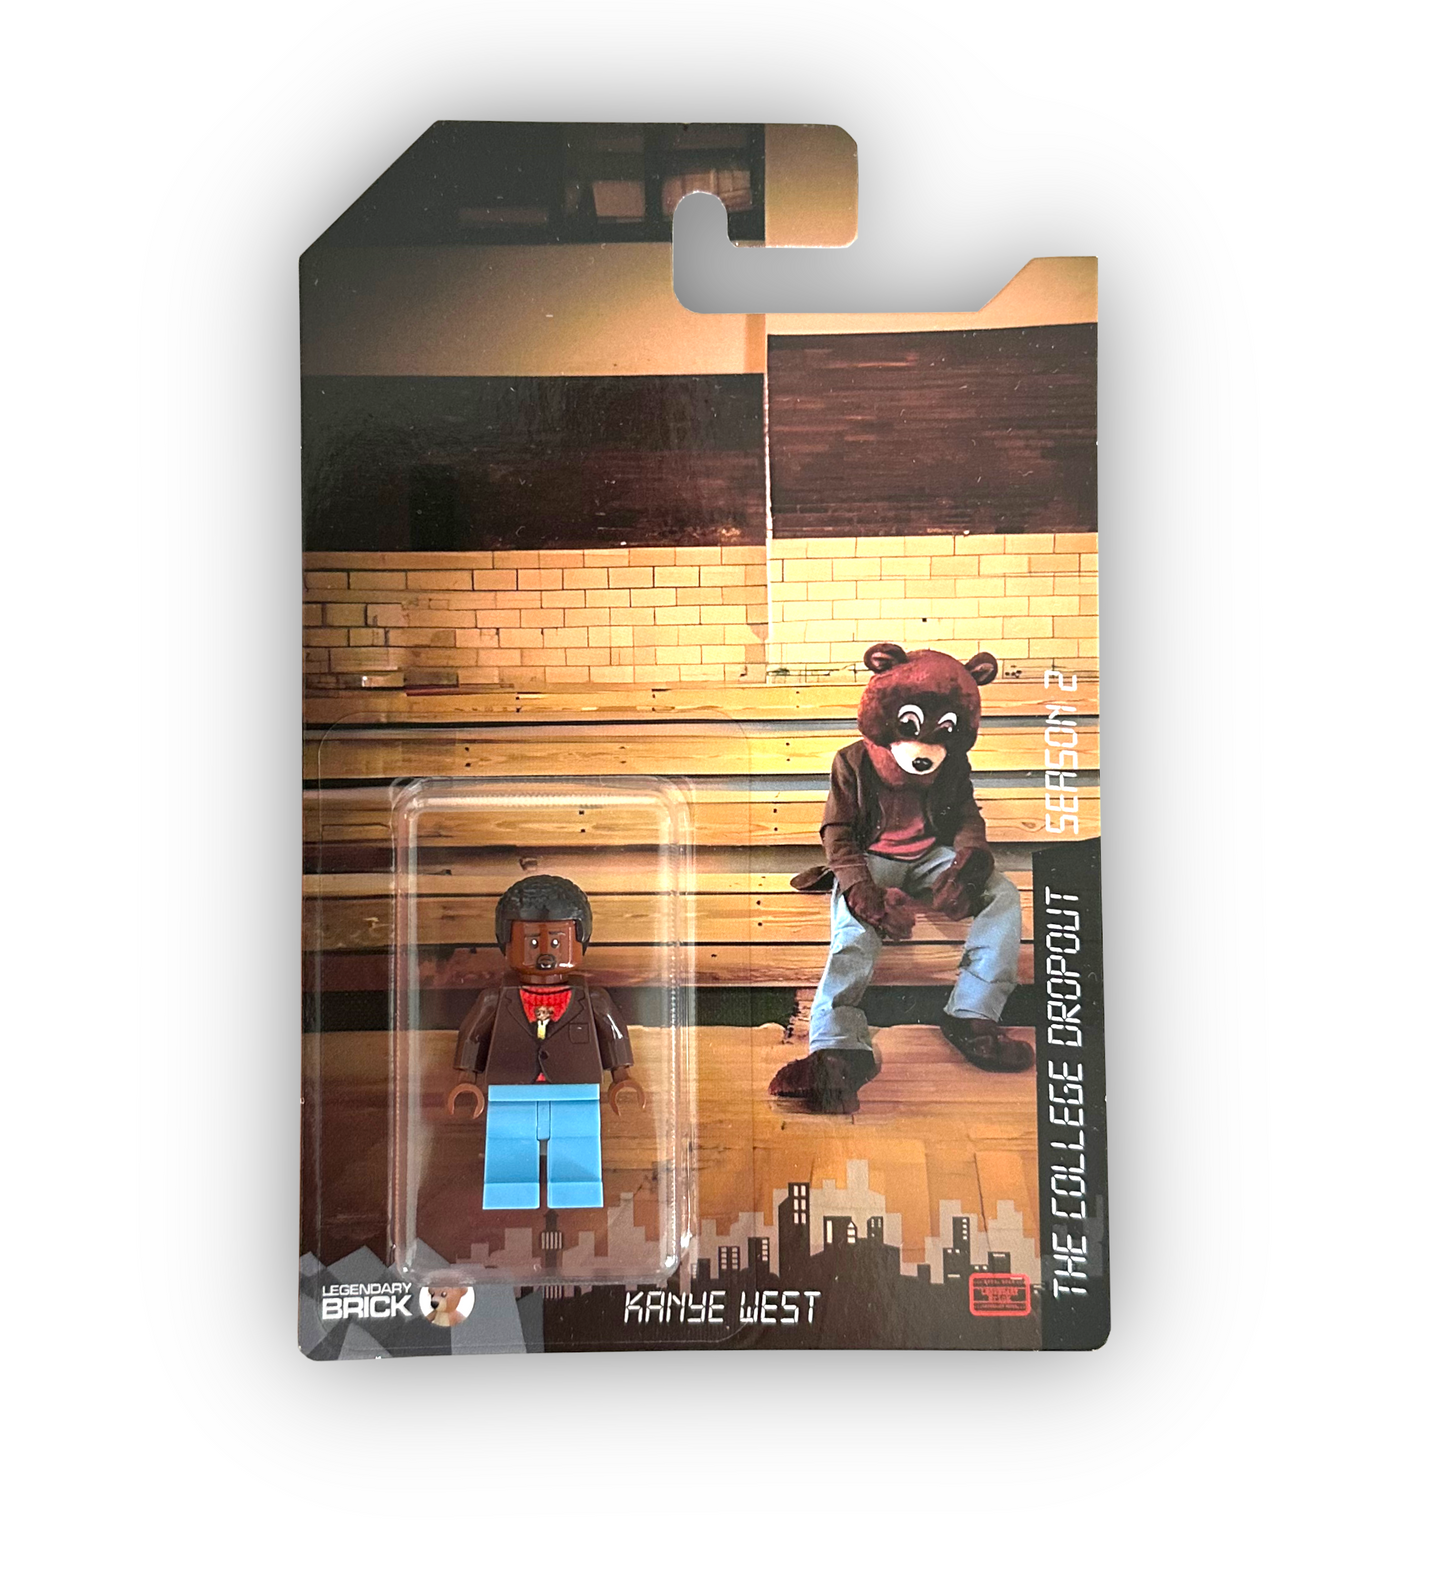 Kanye West - The College Dropout- Season 2